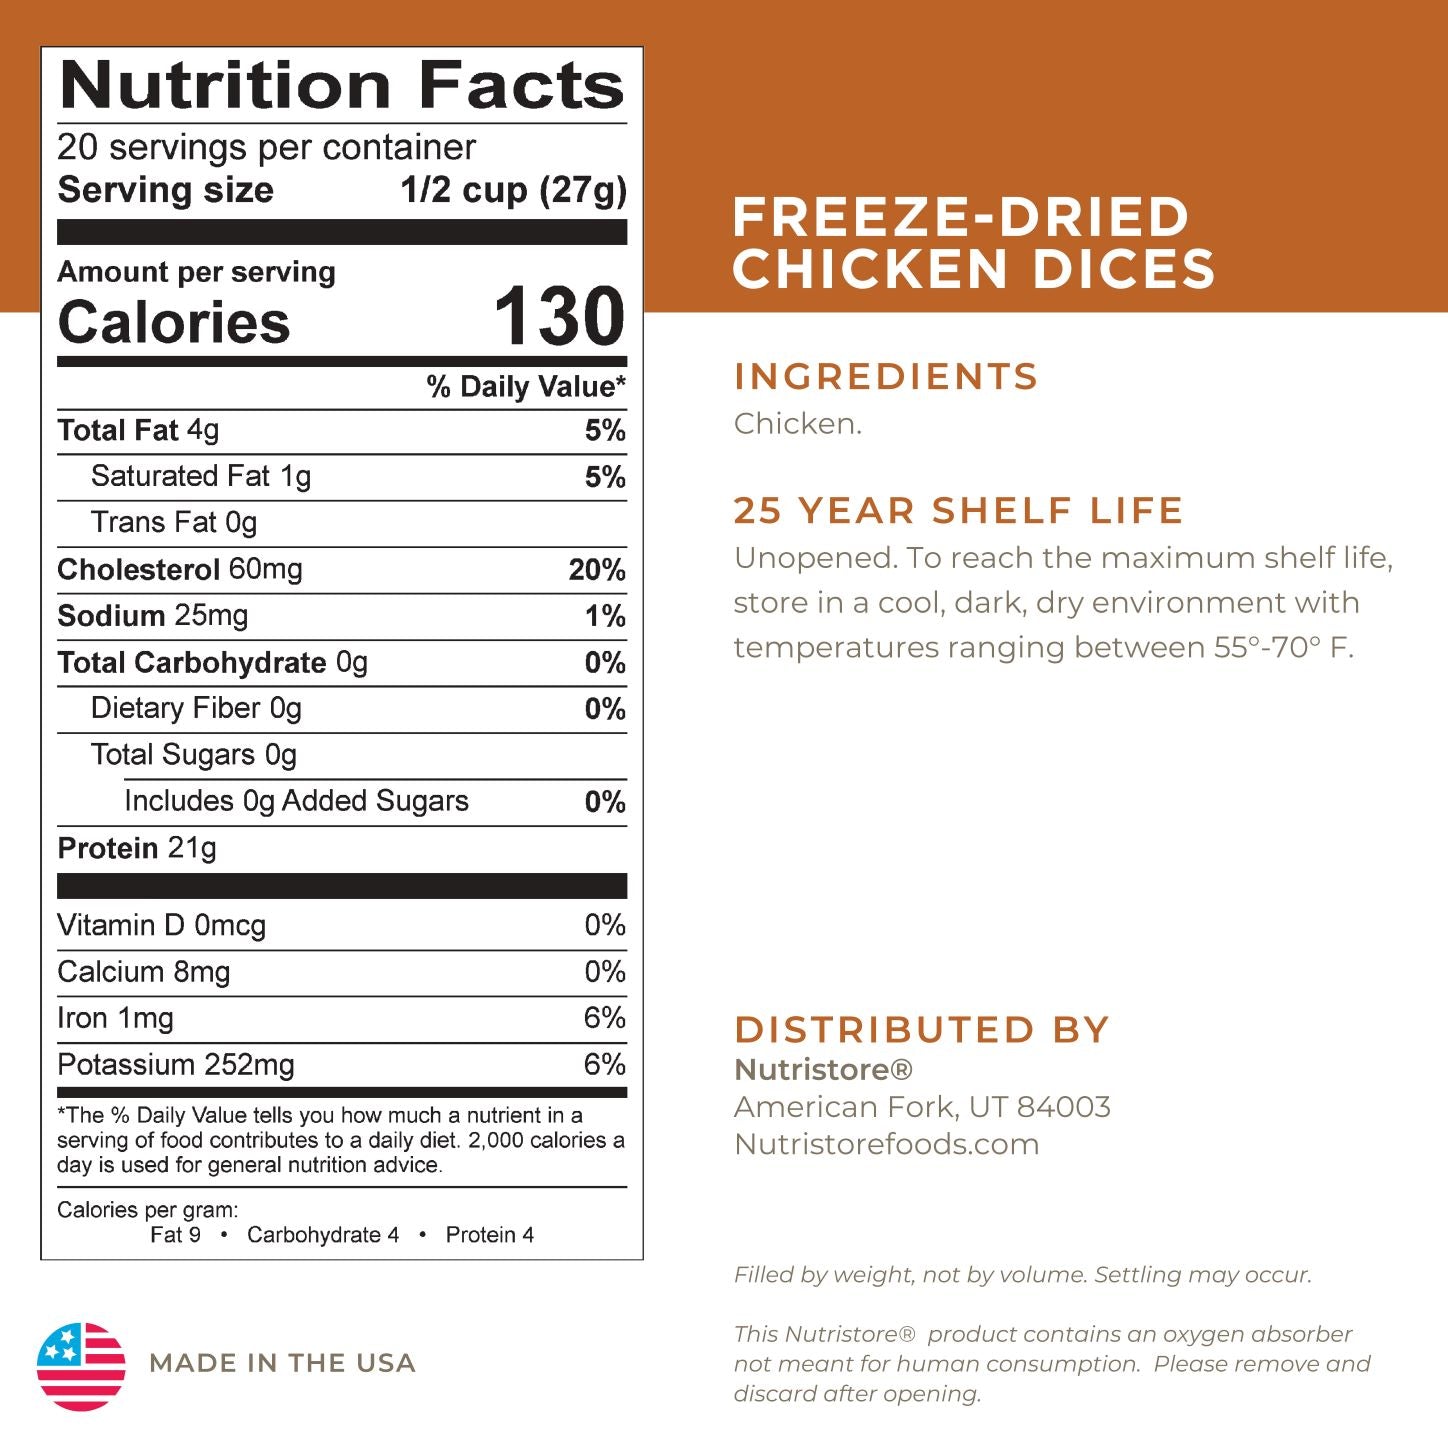 Chicken Dices Freeze Dried - #10 Can